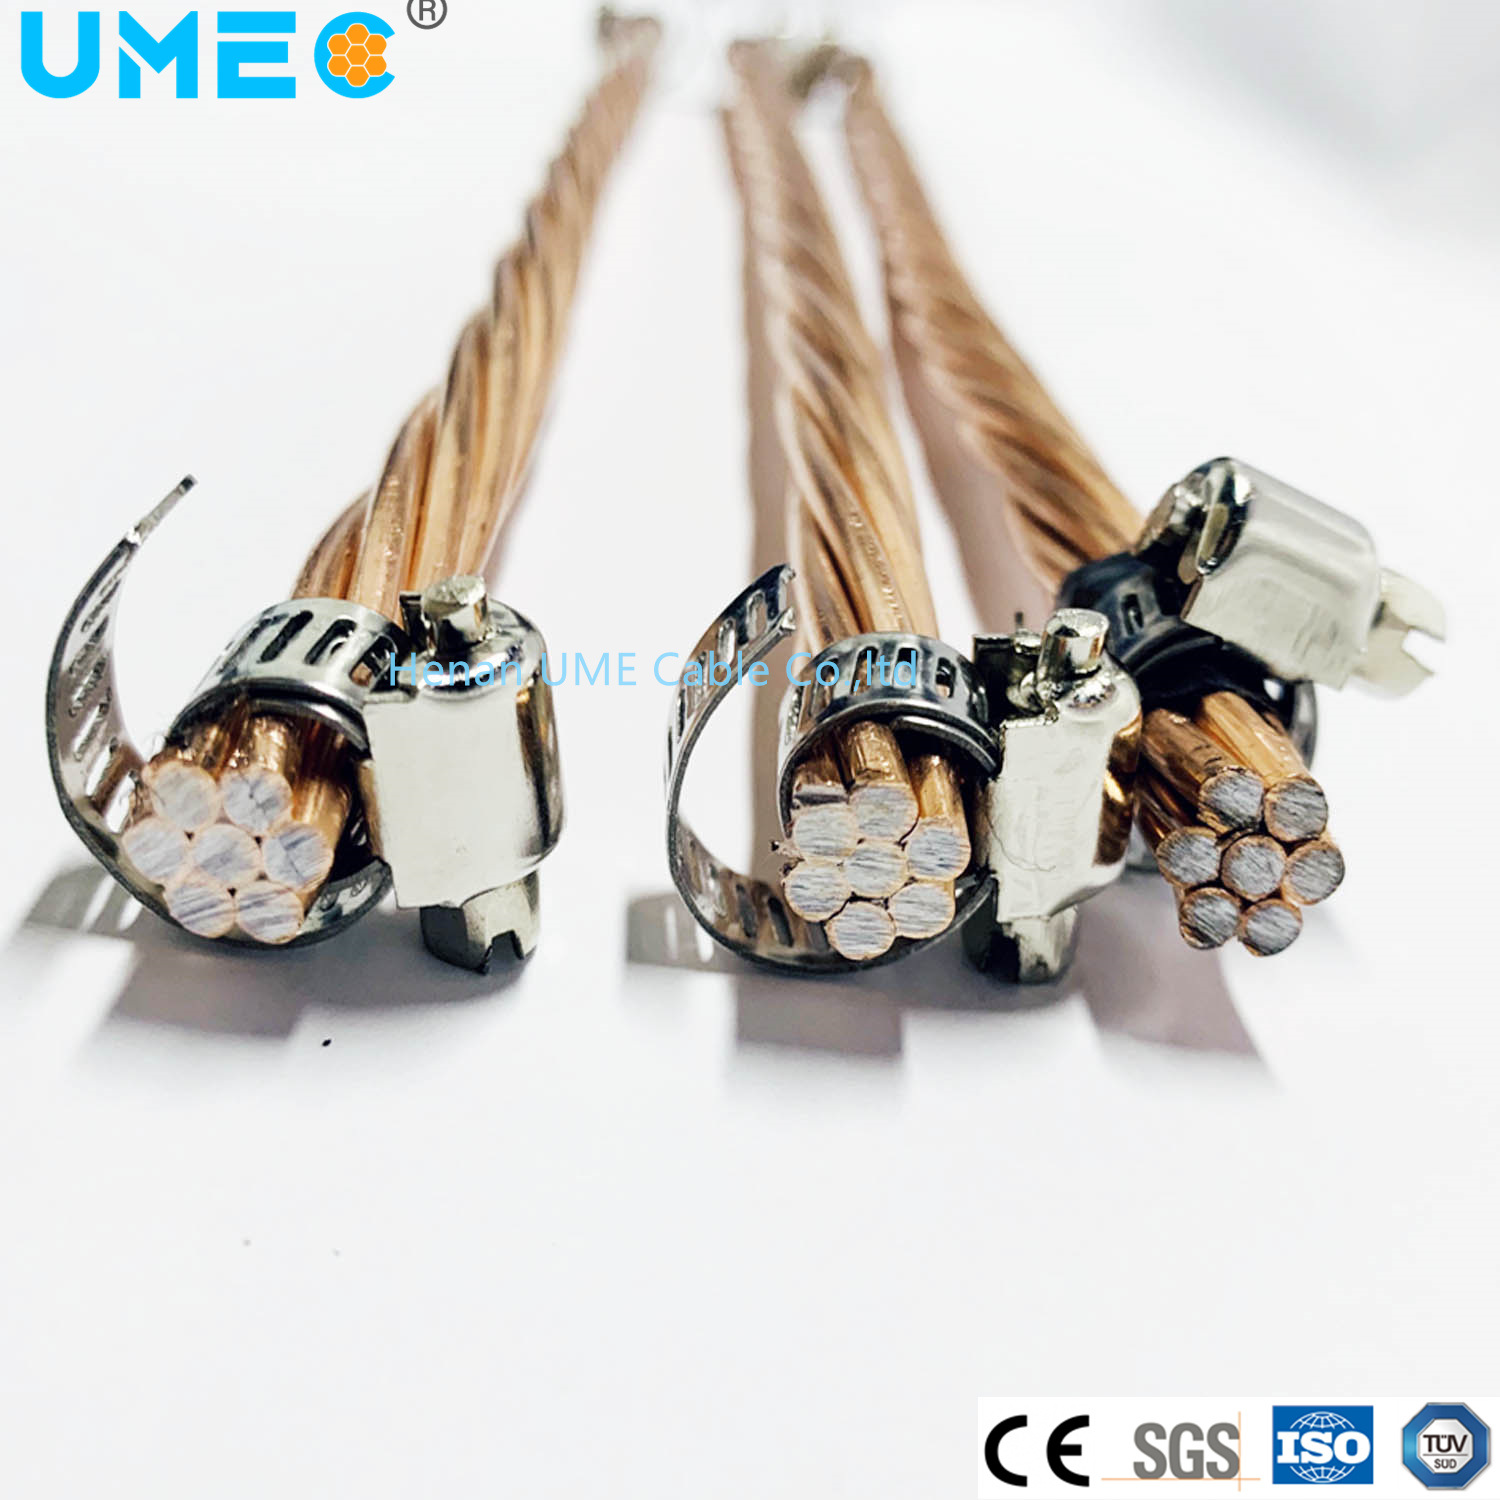 Electrical Bare Copper Clad Steel CCS Used for Coaxial Cable 15-40%Icas Annealed and Hard Drawn Electric Bare Wire